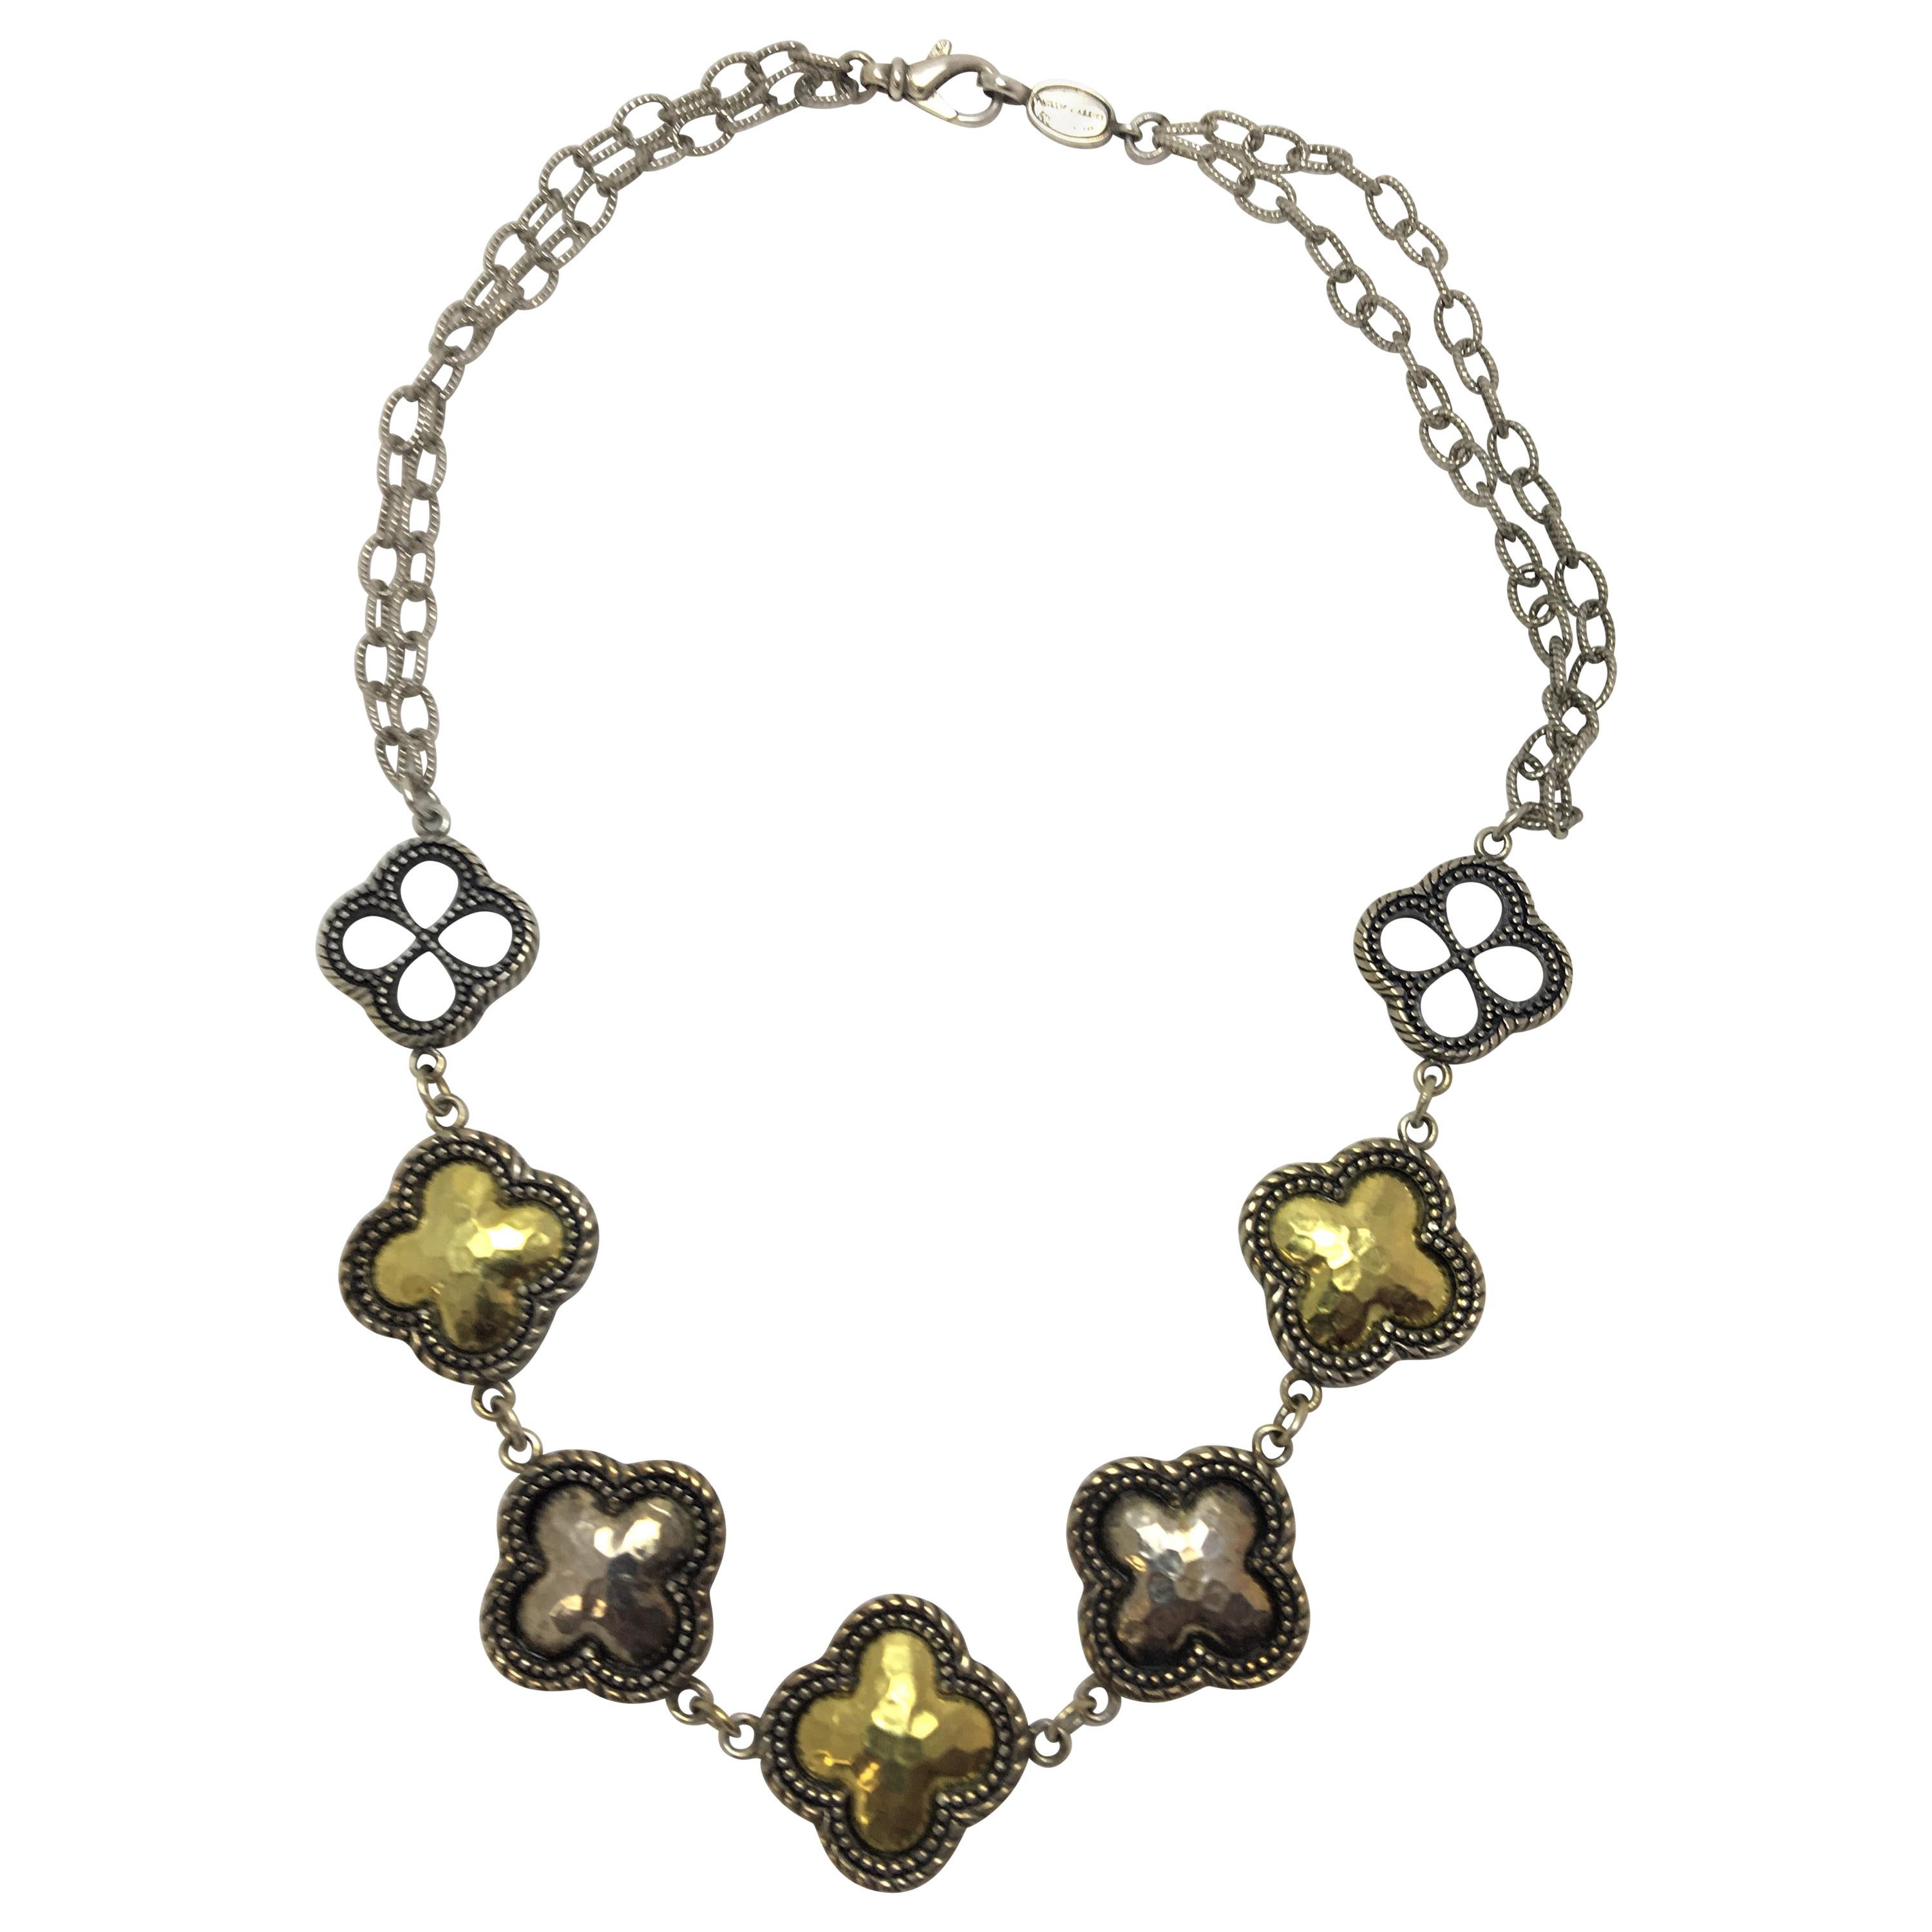 Phillip Gabriel Silver and Gold "Clover" Necklace